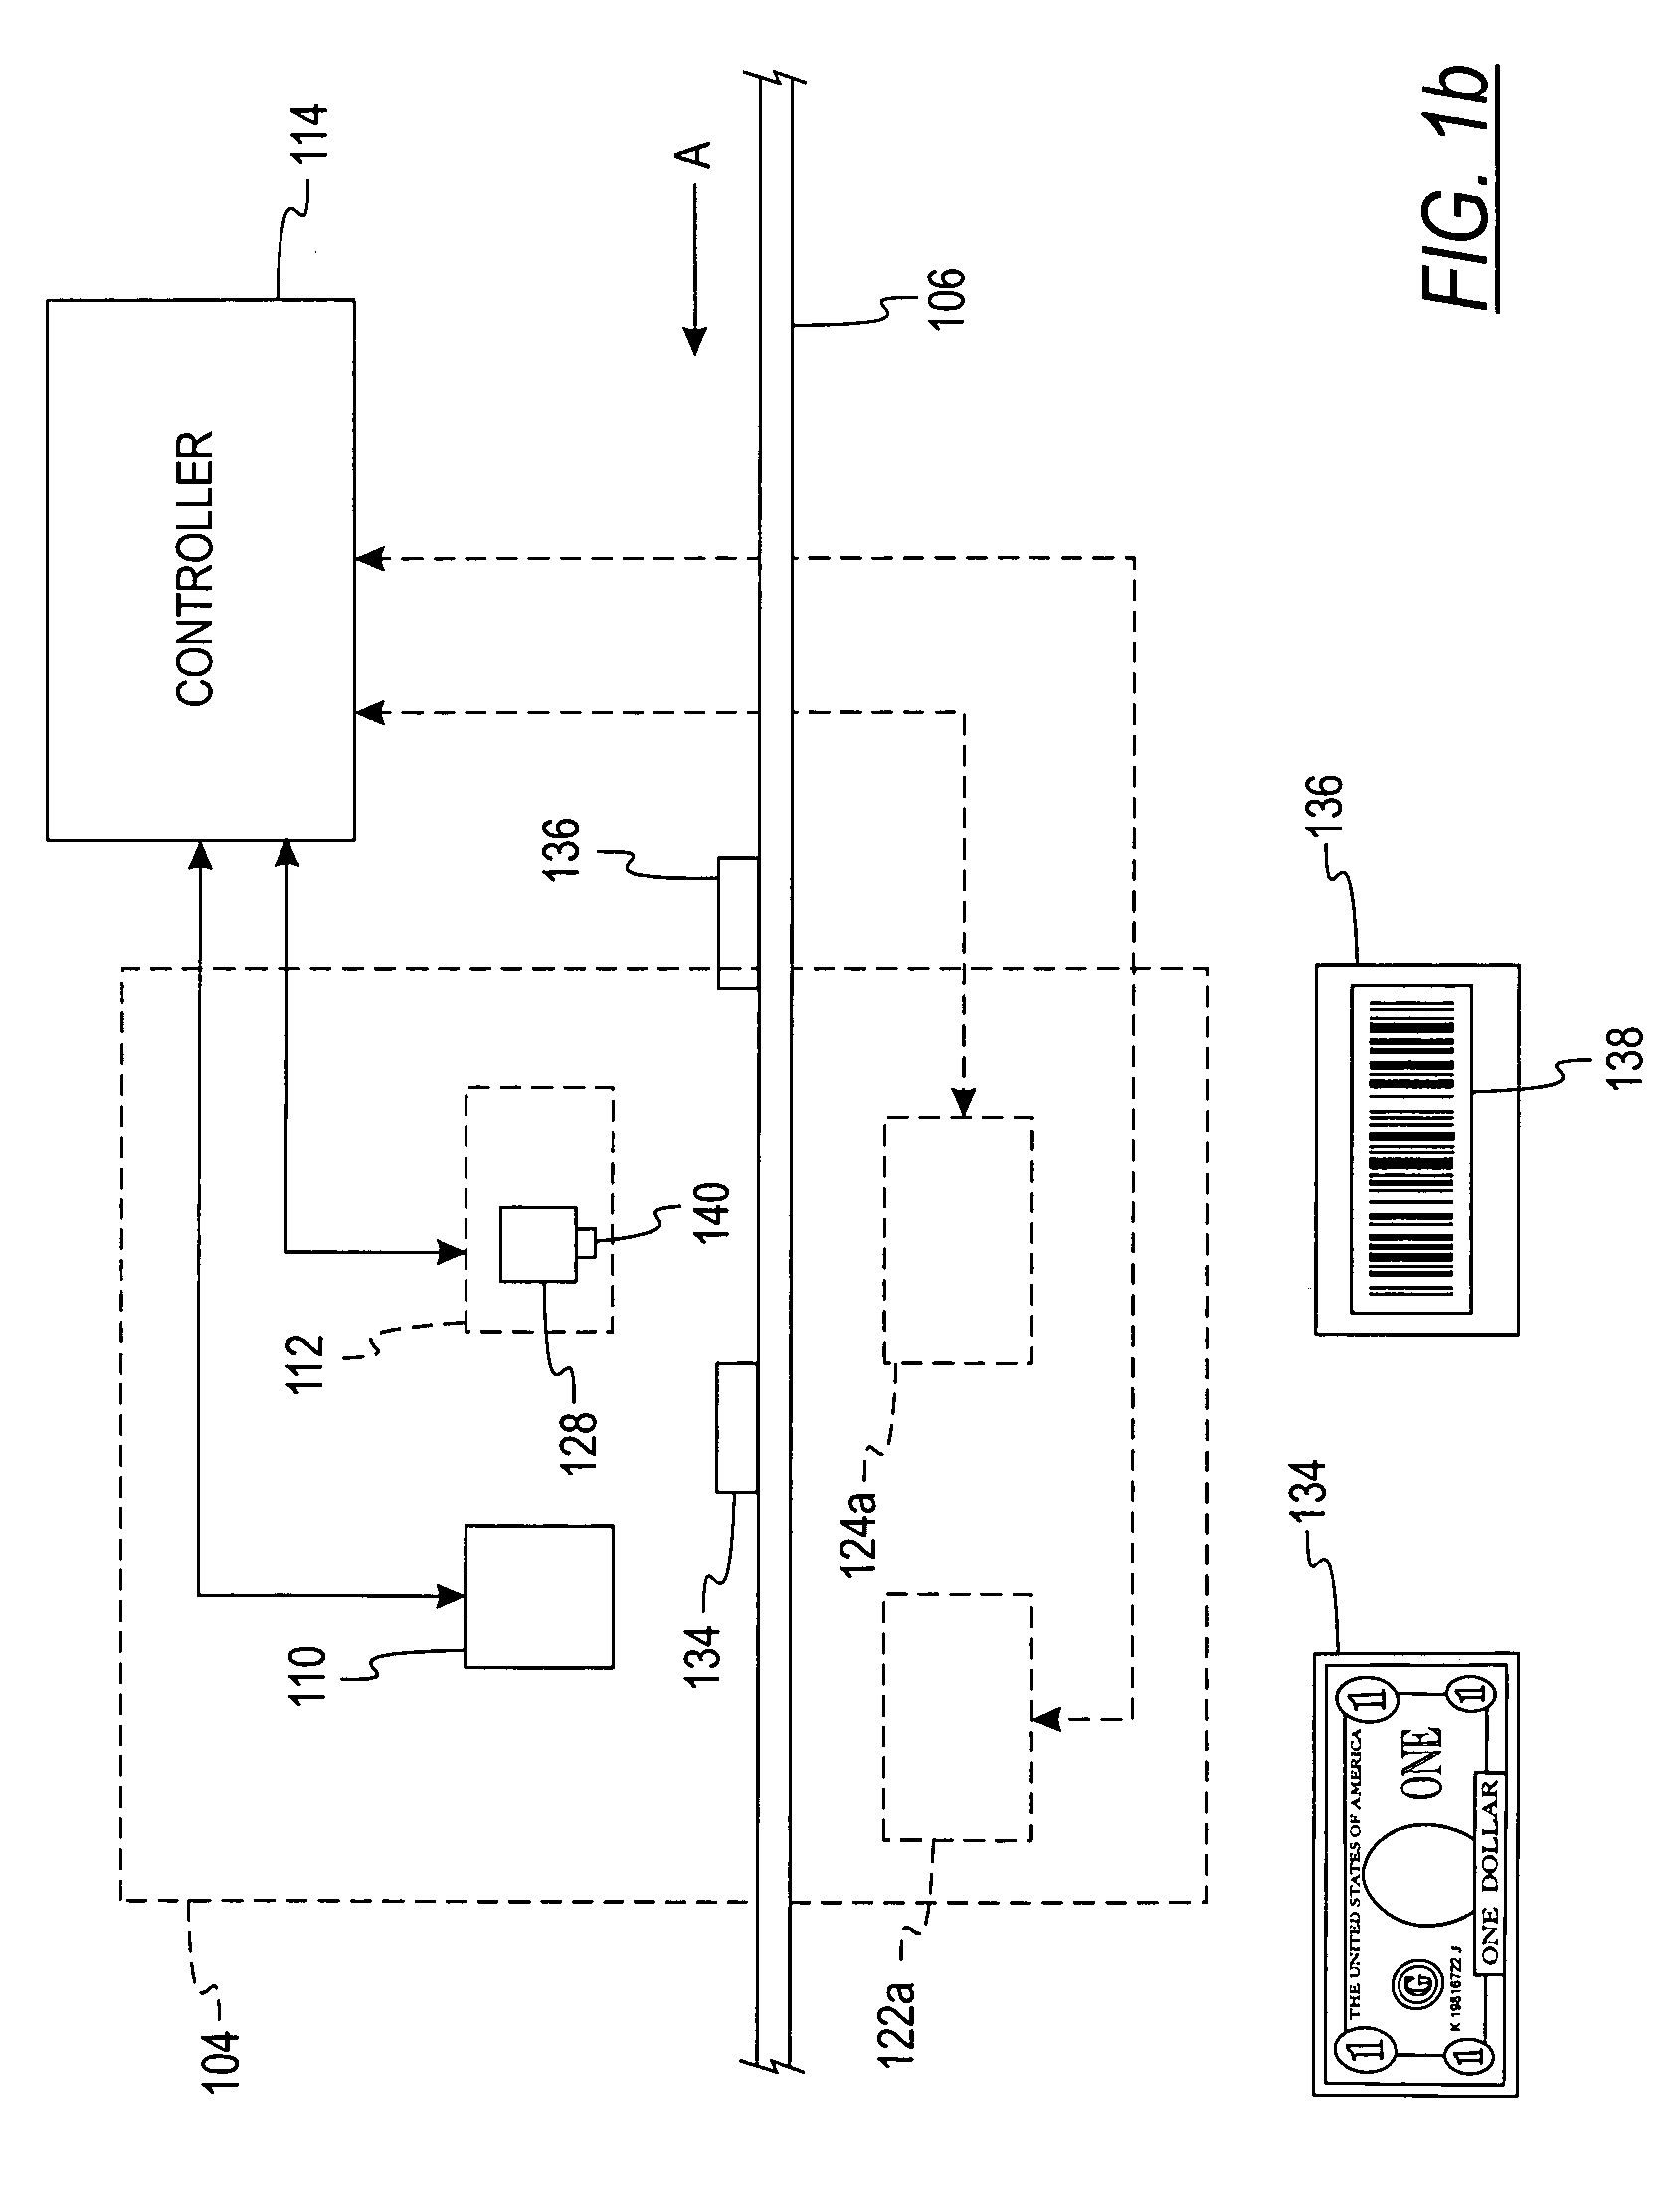 System and method for processing batches of documents